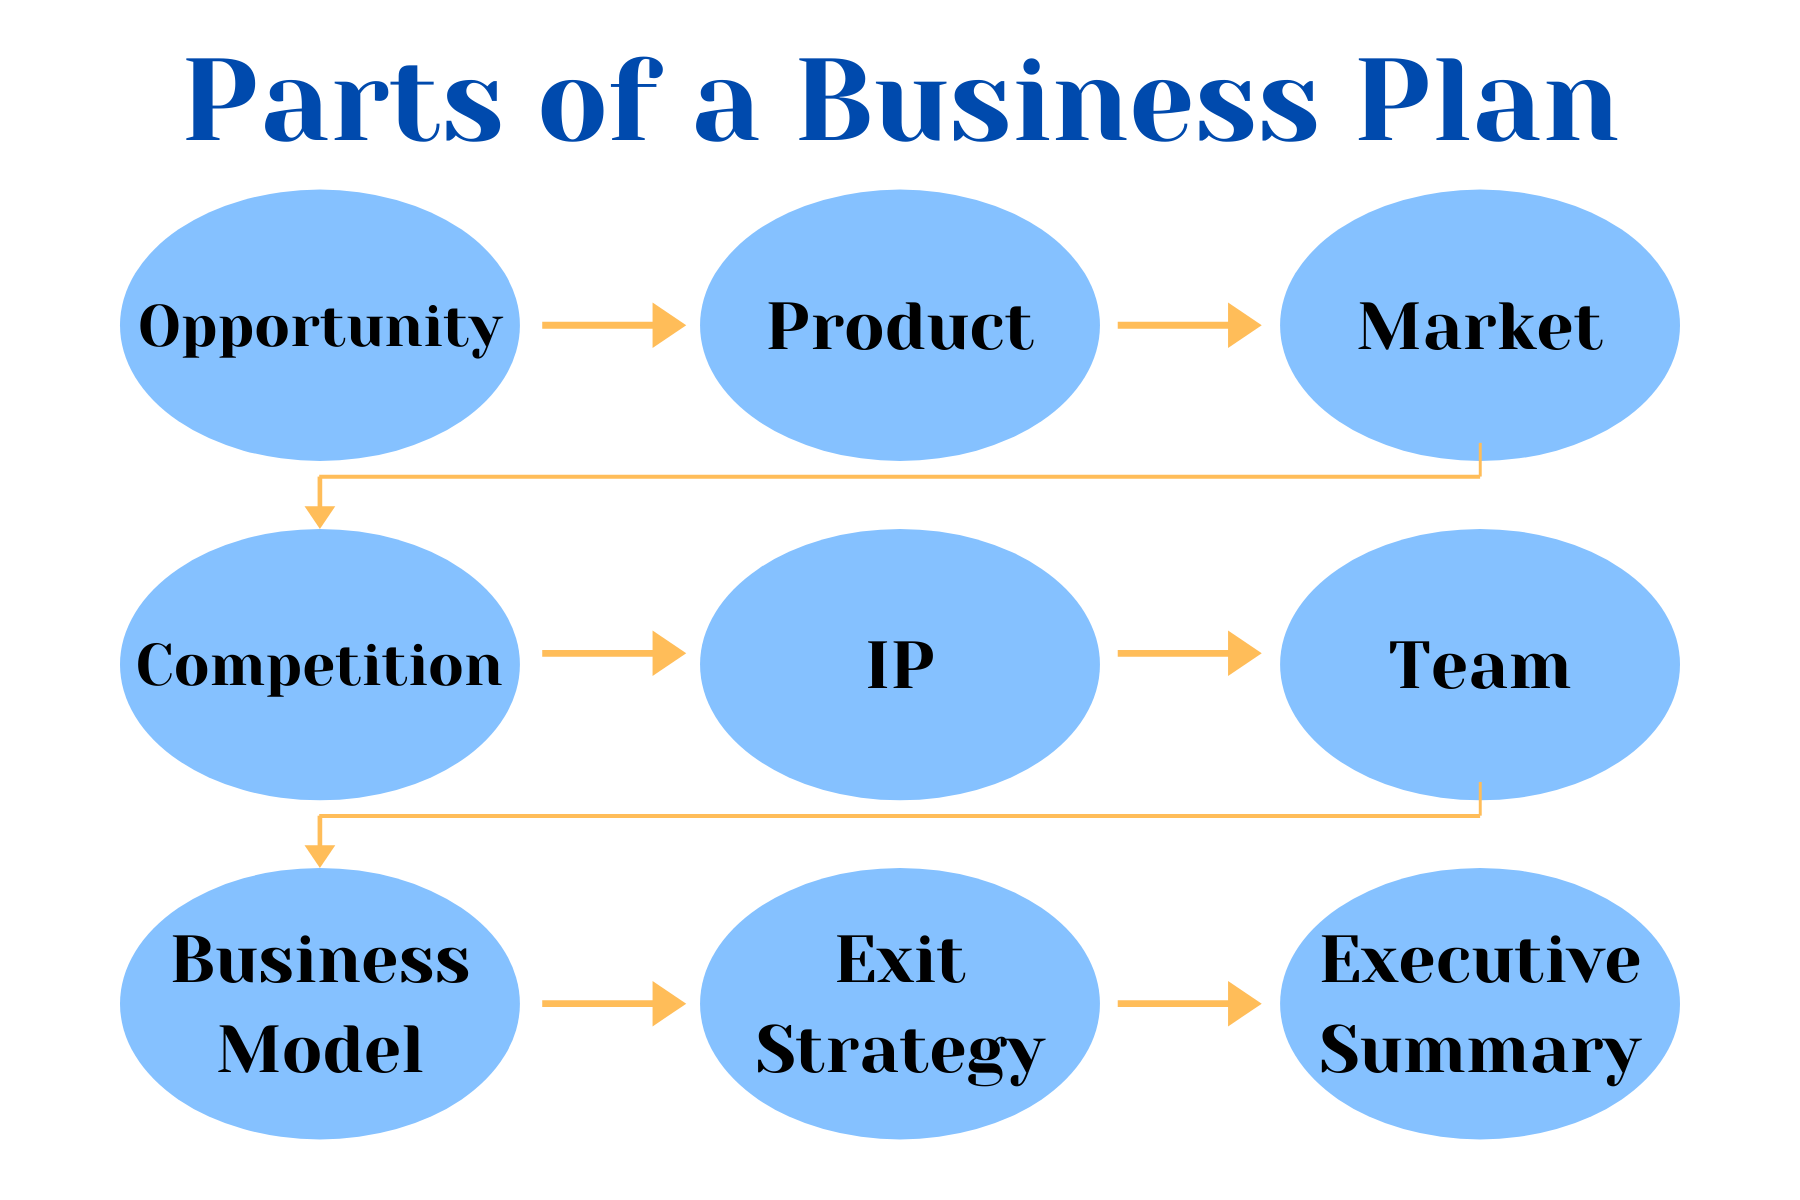 outline and analyse the components of a business plan